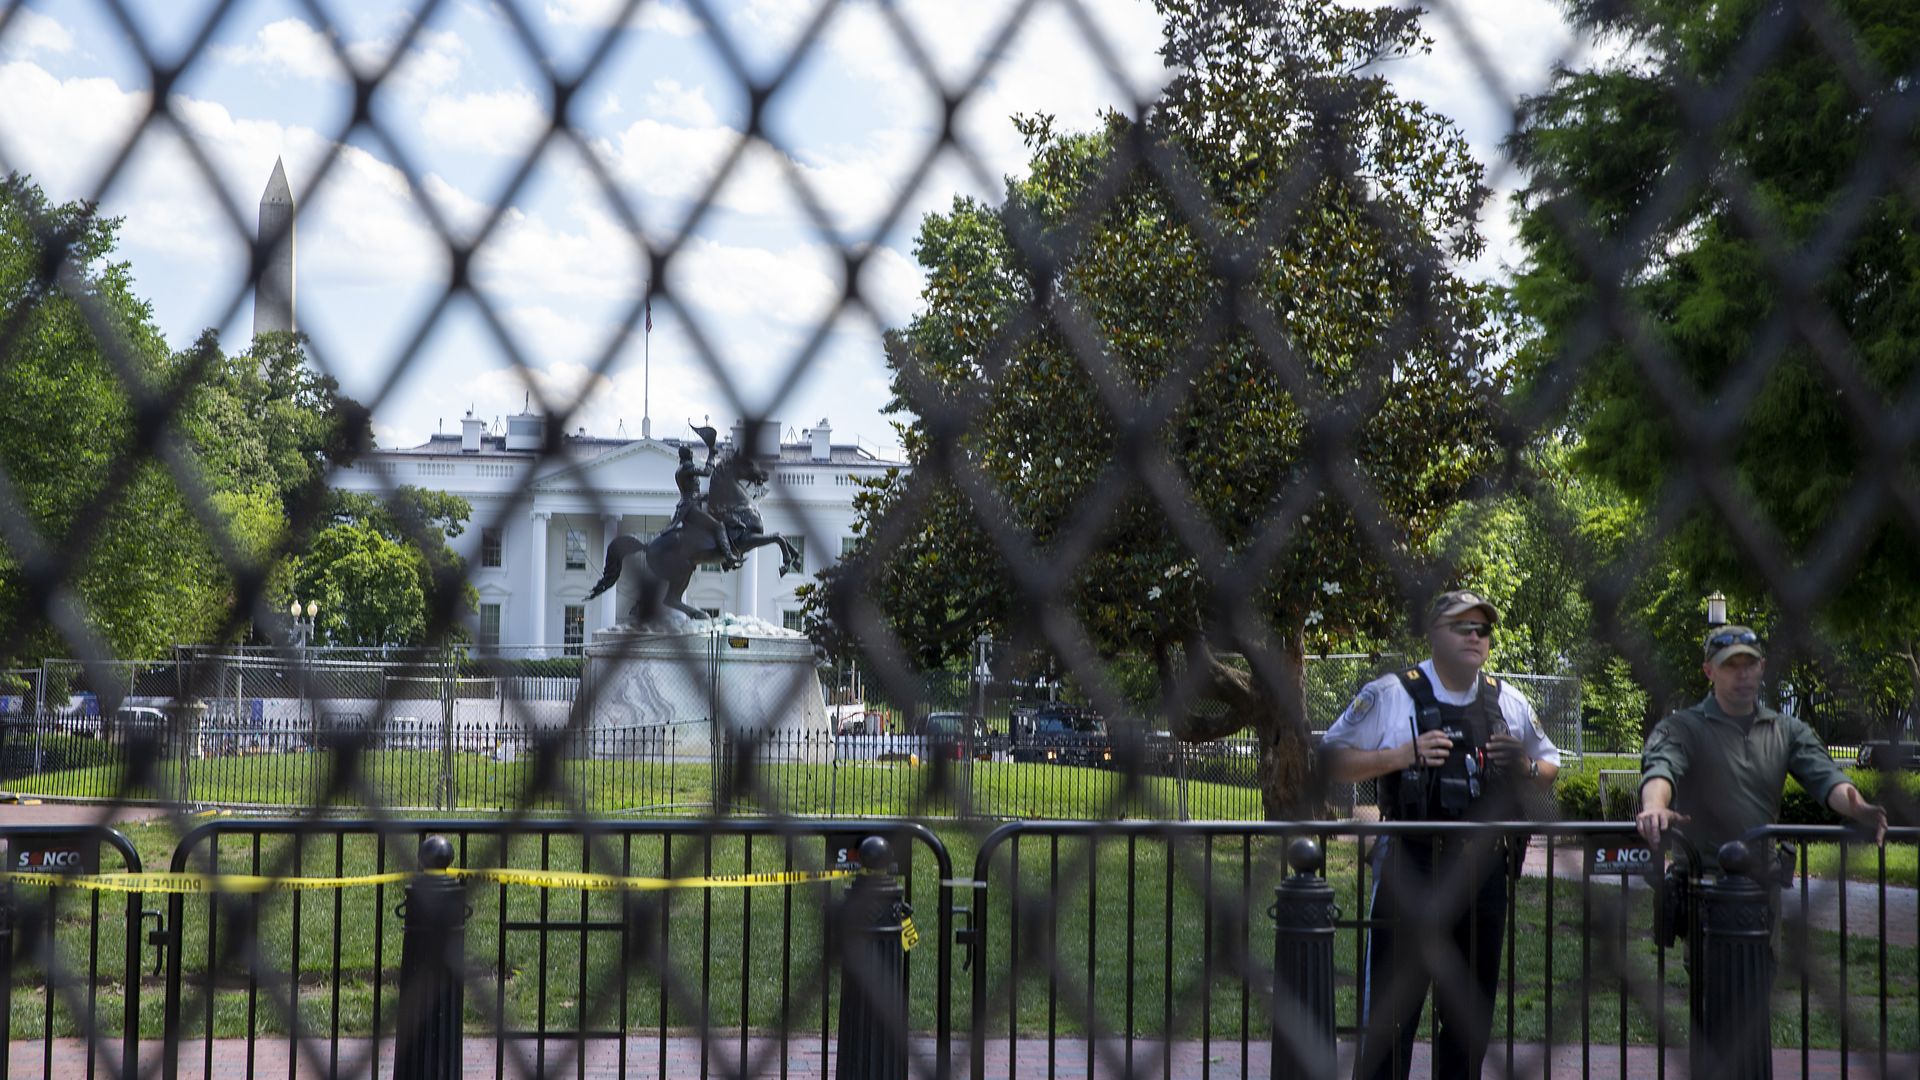 Steel fences with concrete bases were reinstalled after a failed attempt to take down a statue of President Andrew Jackson at Lafayette Park on June 24, 2020 in Washington, DC. 